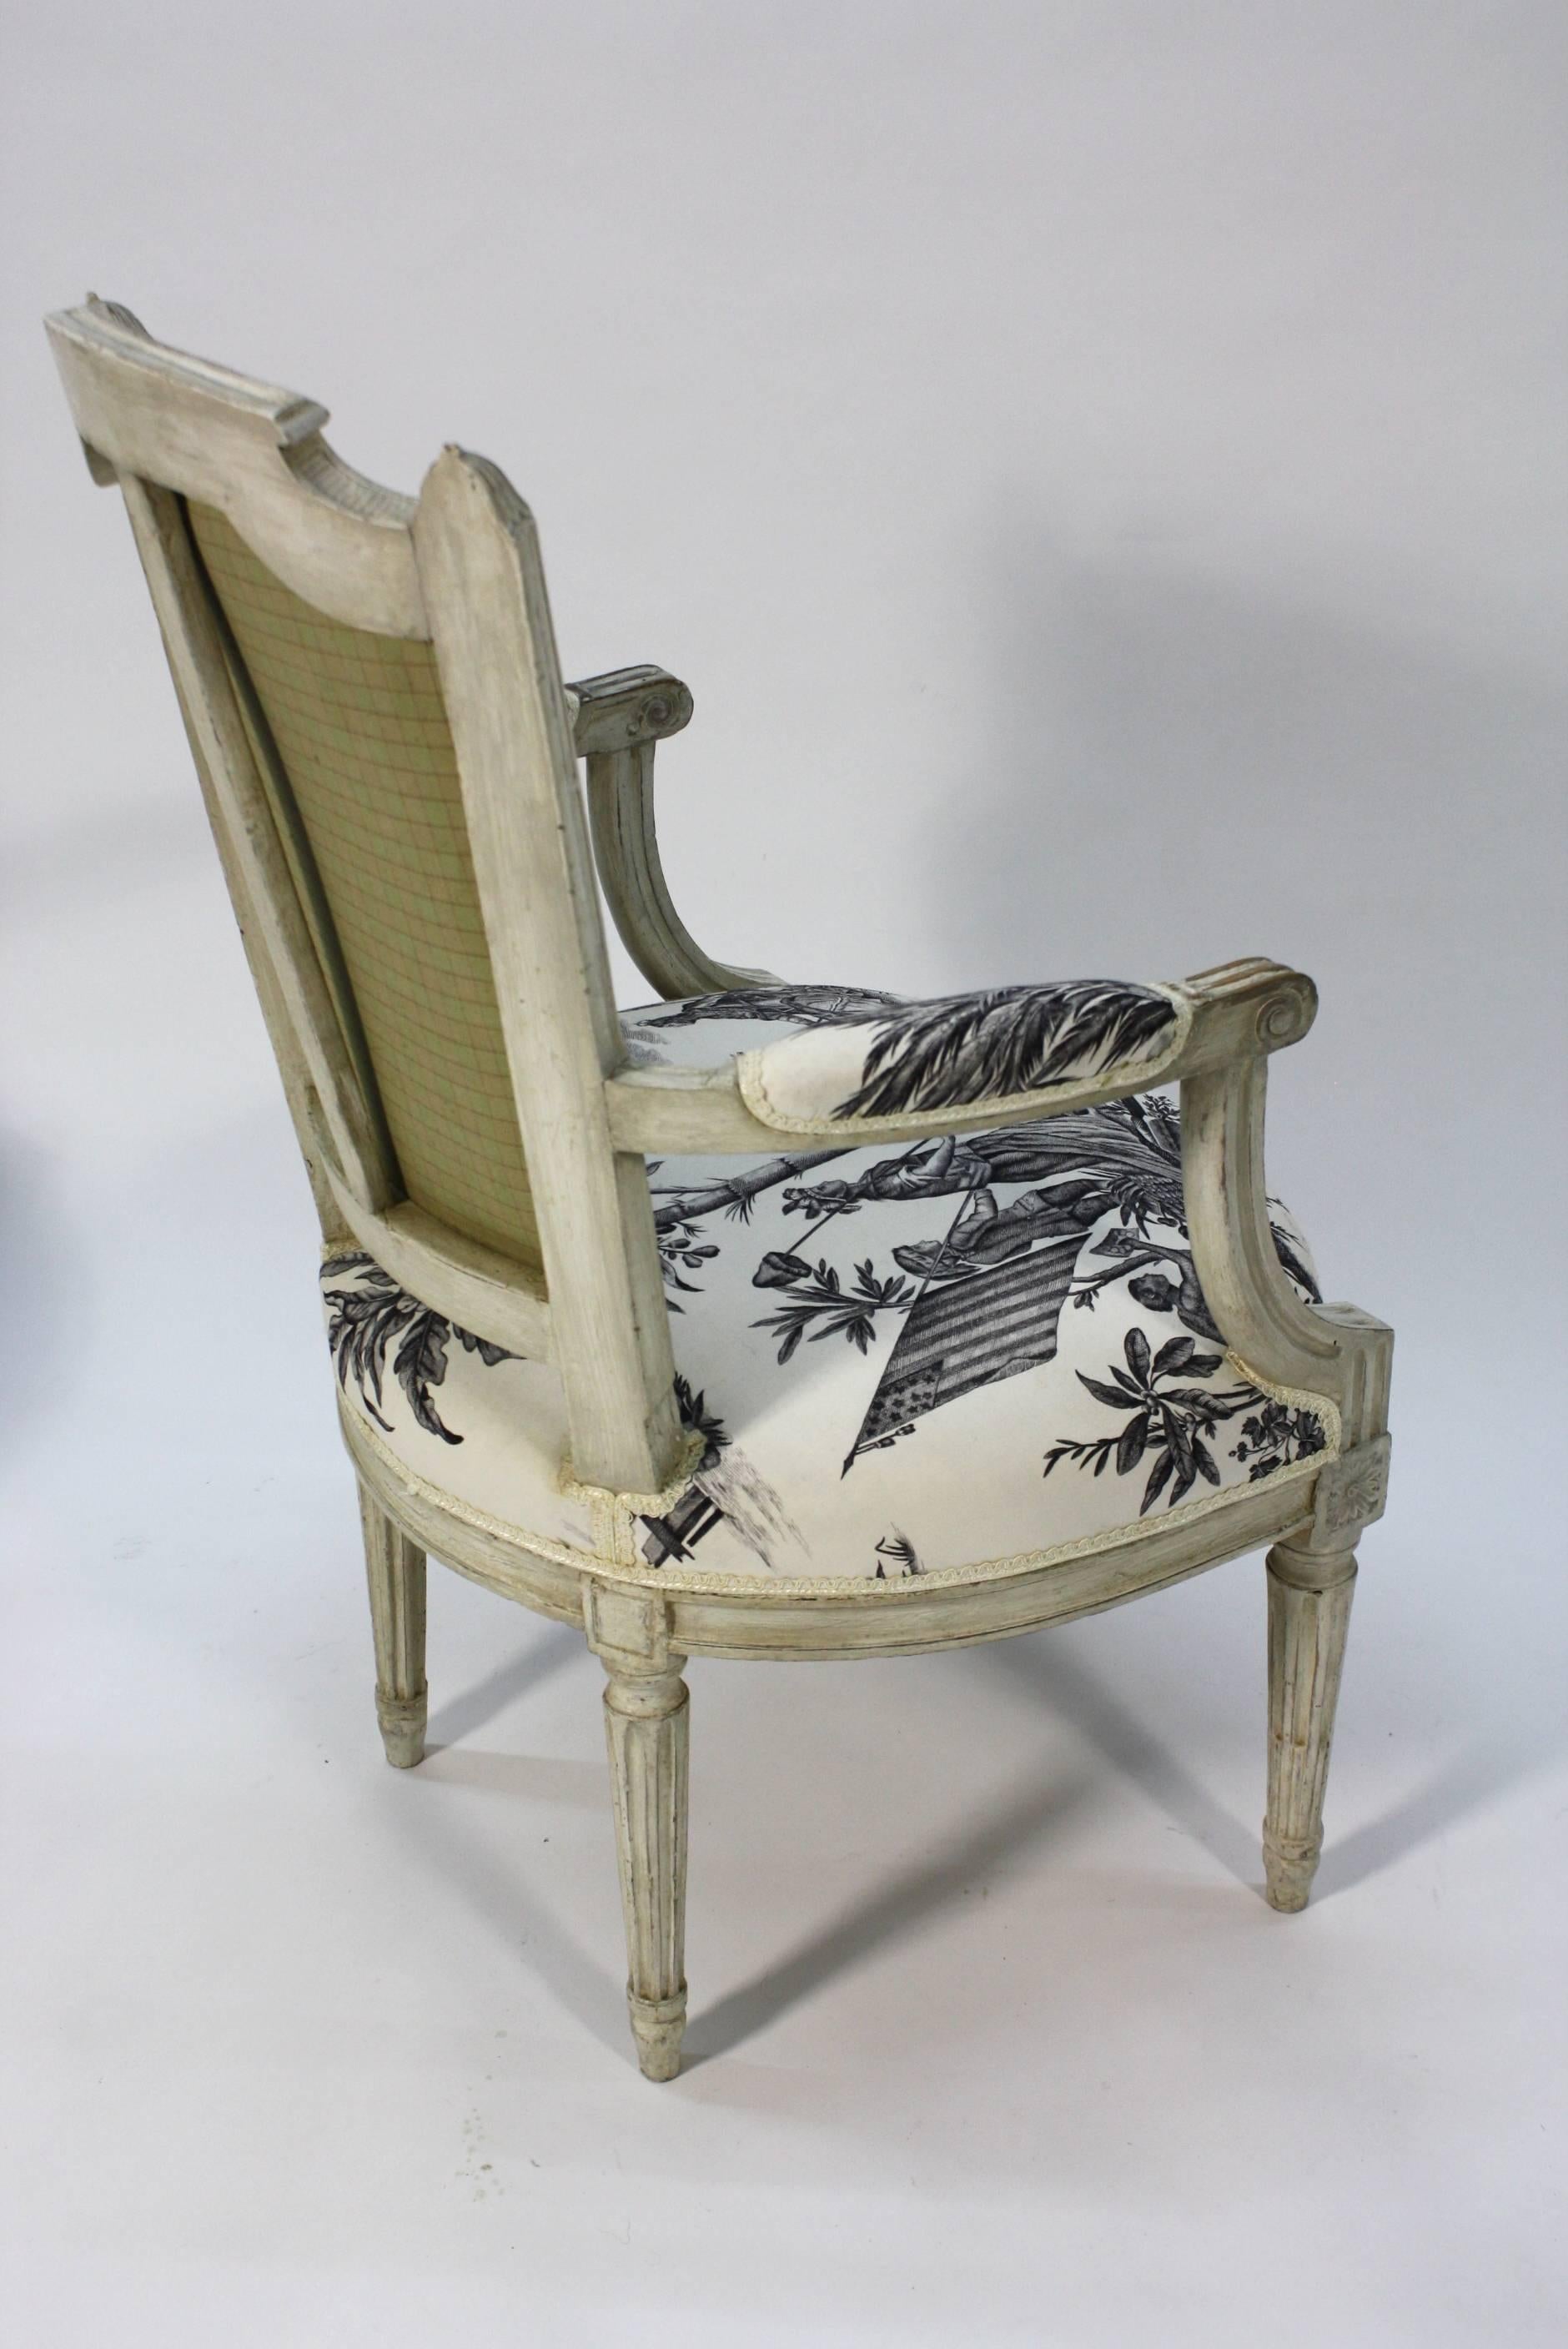 Pair of French Louis XVI Period Fauteuils or Armchairs In Good Condition For Sale In Pembroke, MA